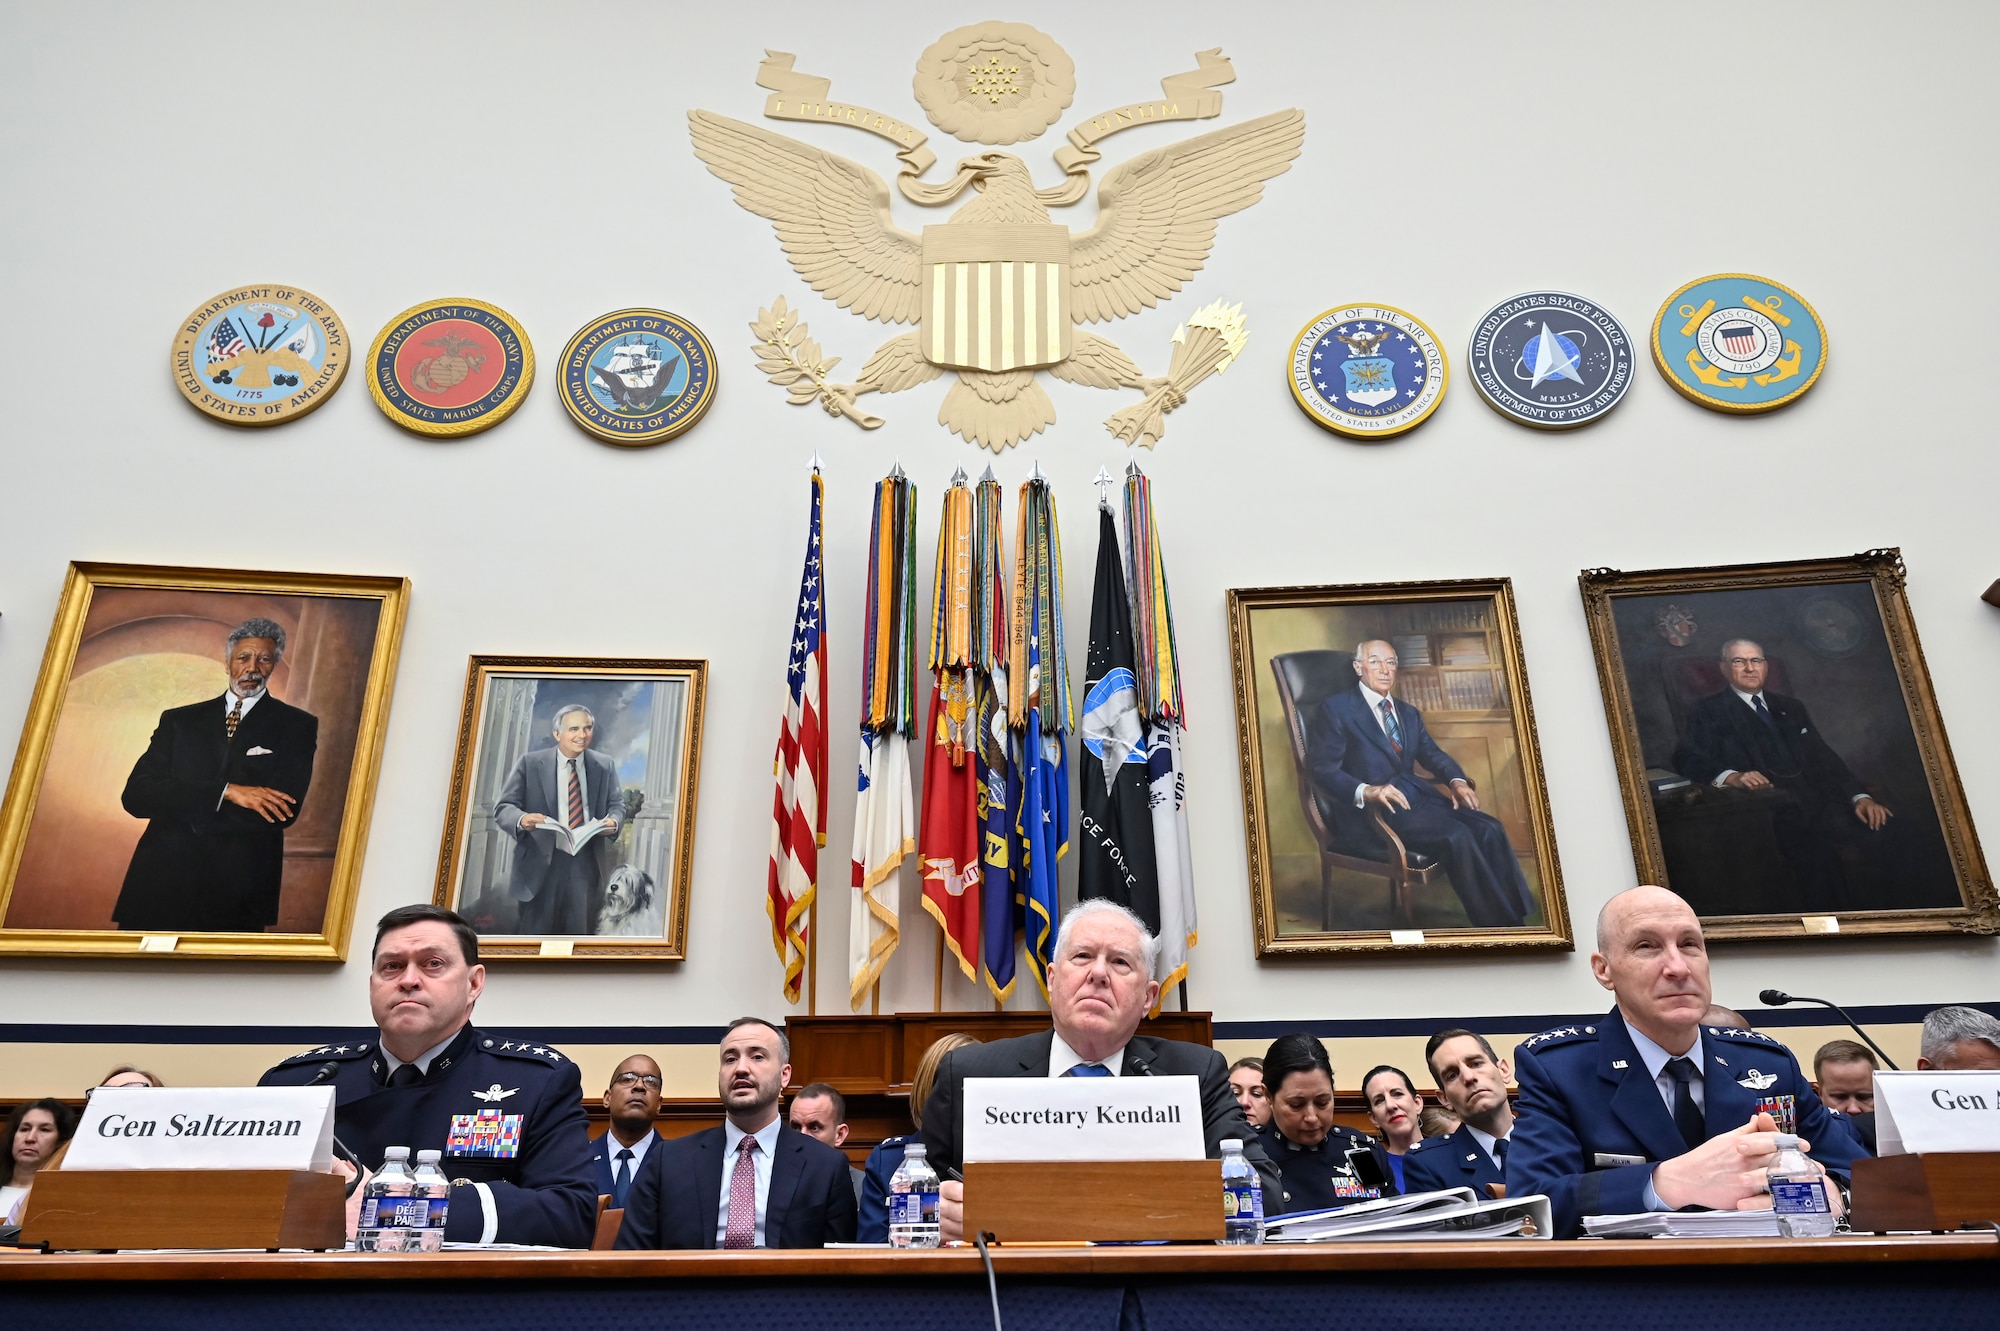 Chief of Space Operations Gen. Chance Saltzman, Secretary of the Air Force Frank Kendall and Air Force Chief of Staff Gen. David Allvin listen to opening remarks during a House Armed Services Committee hearing for the Department of the Air Force fiscal year 2025 budget request, Washington, D.C., April 17, 2024. This image has been altered to obscure security badges. (U.S. Air Force photo by Eric Dietrich)